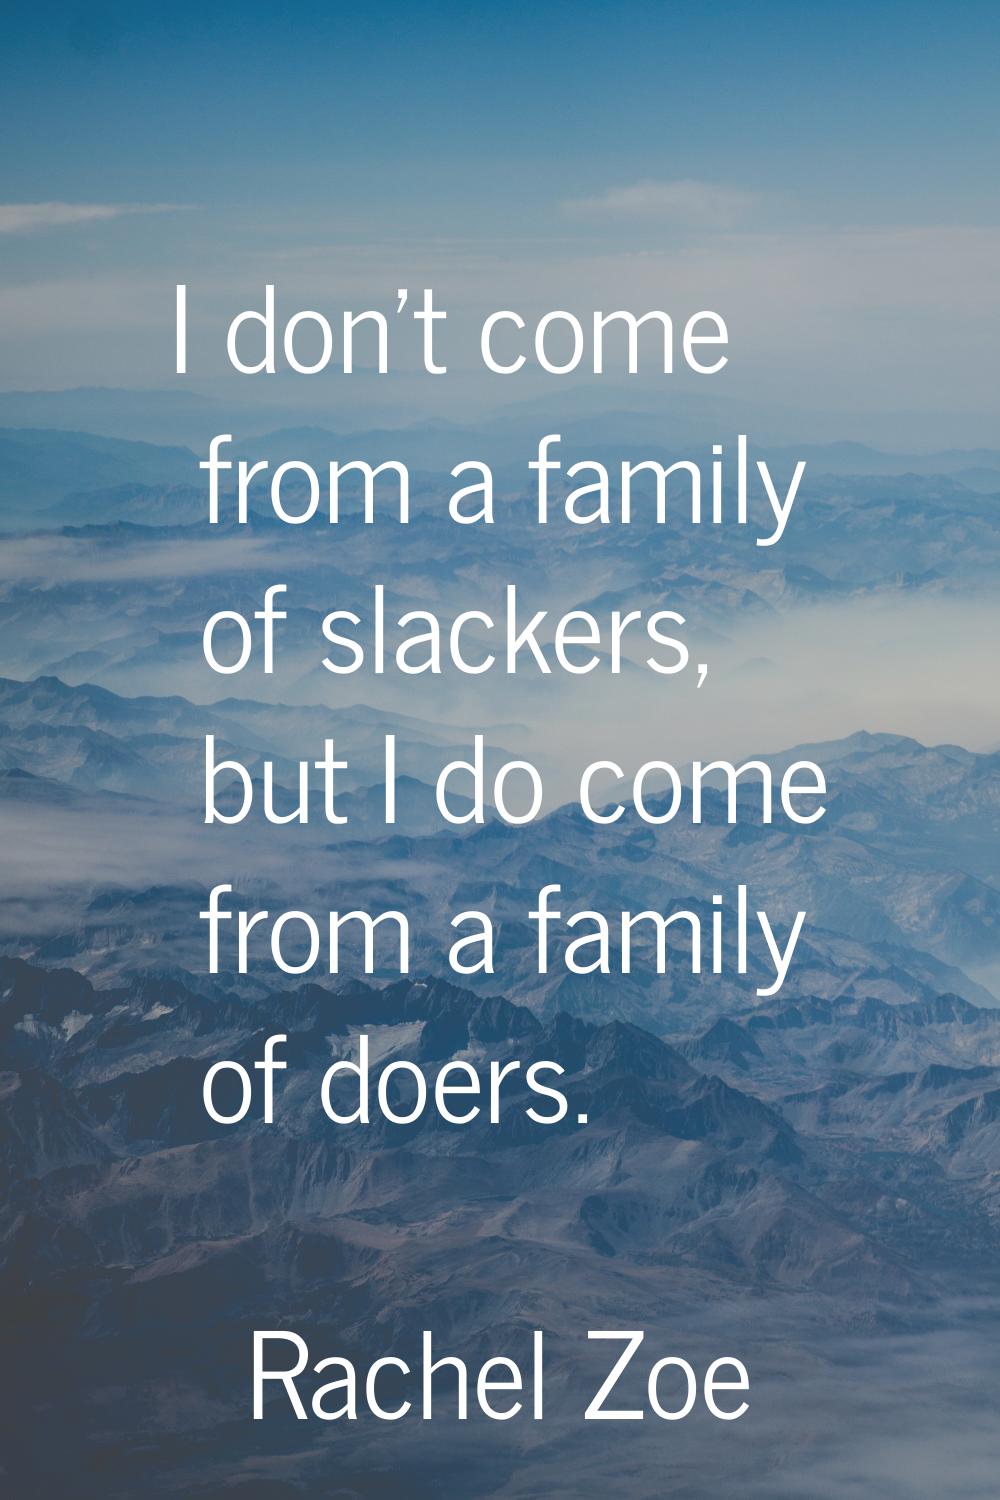 I don't come from a family of slackers, but I do come from a family of doers.